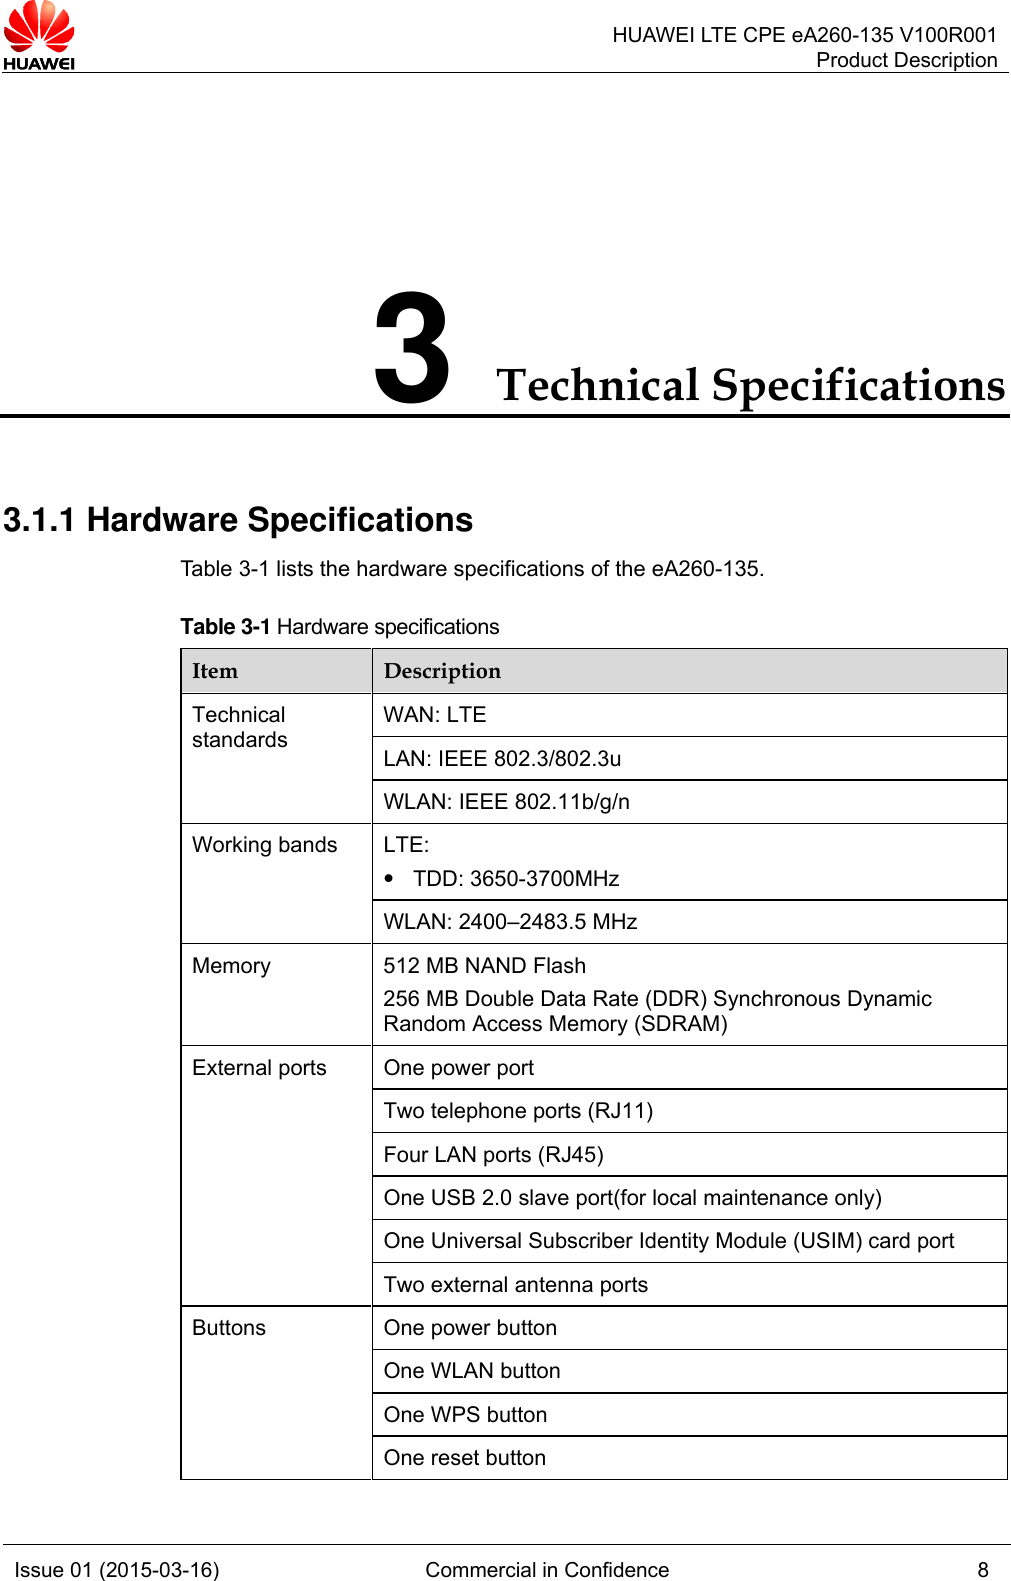  HUAWEI LTE CPE eA260-135 V100R001Product Description Issue 01 (2015-03-16) Commercial in Confidence 8  3 Technical Specifications 3.1.1 Hardware Specifications Table 3-1 lists the hardware specifications of the eA260-135. Table 3-1 Hardware specifications Item  Description Technical standards WAN: LTE LAN: IEEE 802.3/802.3u WLAN: IEEE 802.11b/g/n Working bands LTE:  z TDD: 3650-3700MHz WLAN: 2400–2483.5 MHz Memory 512 MB NAND Flash 256 MB Double Data Rate (DDR) Synchronous Dynamic Random Access Memory (SDRAM) External ports   One power port Two telephone ports (RJ11) Four LAN ports (RJ45) One USB 2.0 slave port(for local maintenance only) One Universal Subscriber Identity Module (USIM) card port Two external antenna ports Buttons One power button One WLAN button One WPS button One reset button 